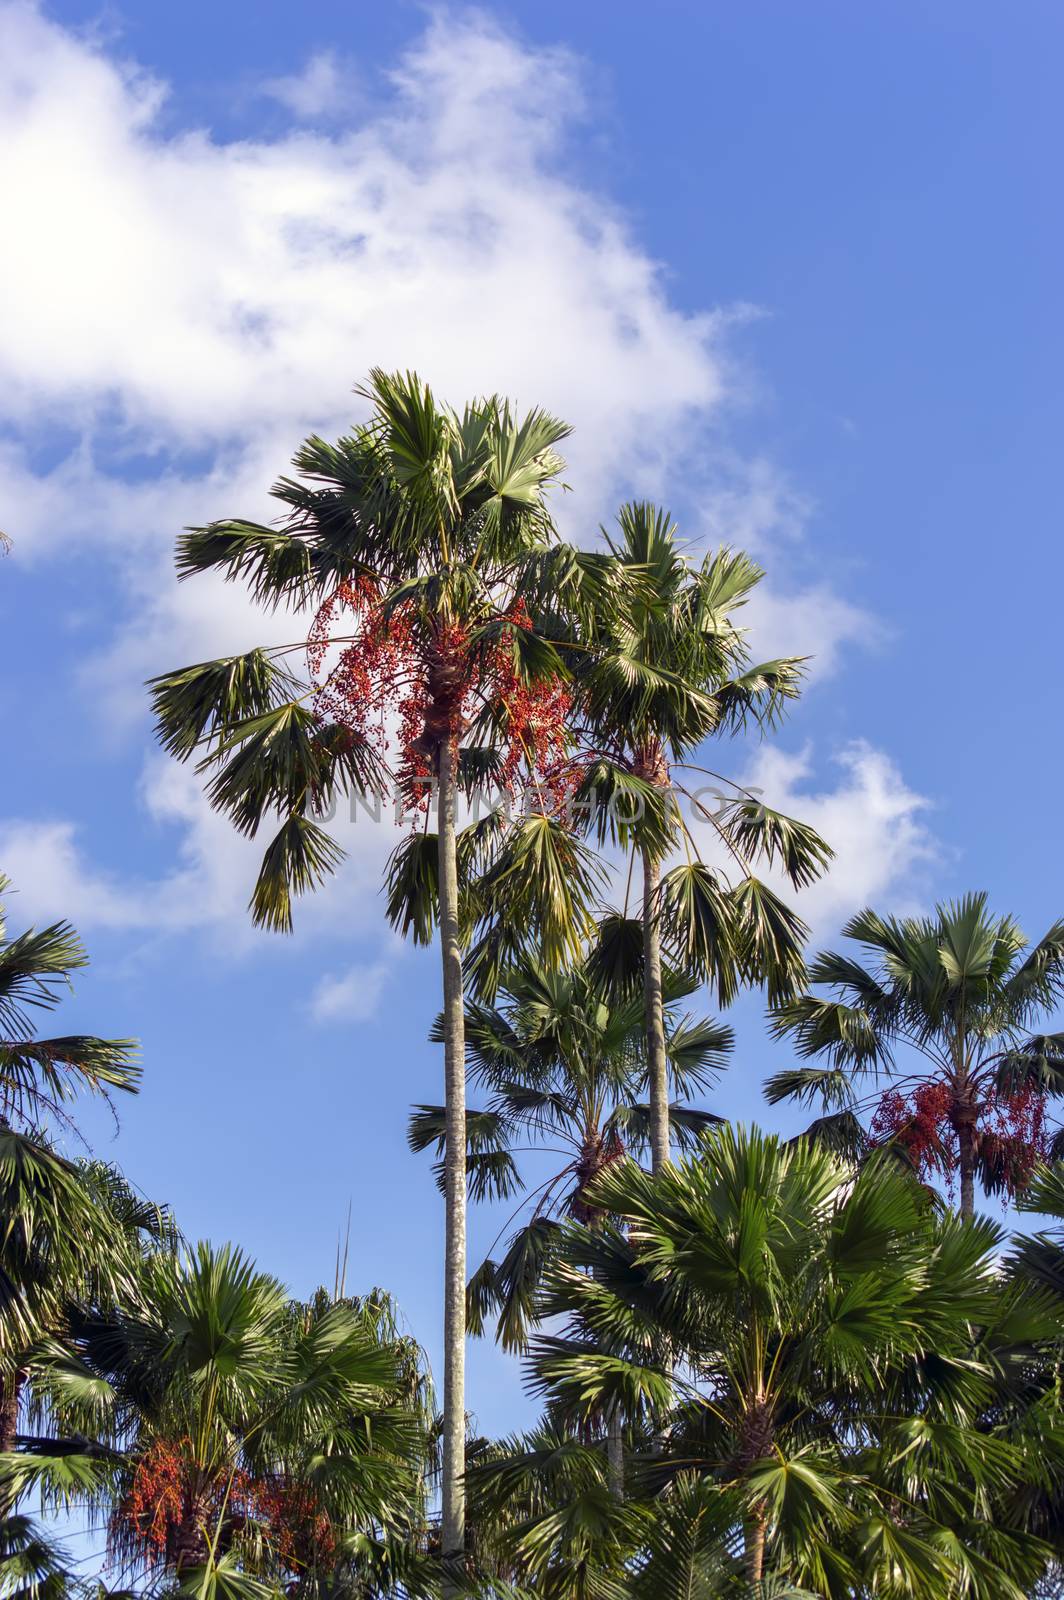 Tropical Palms. by GNNick